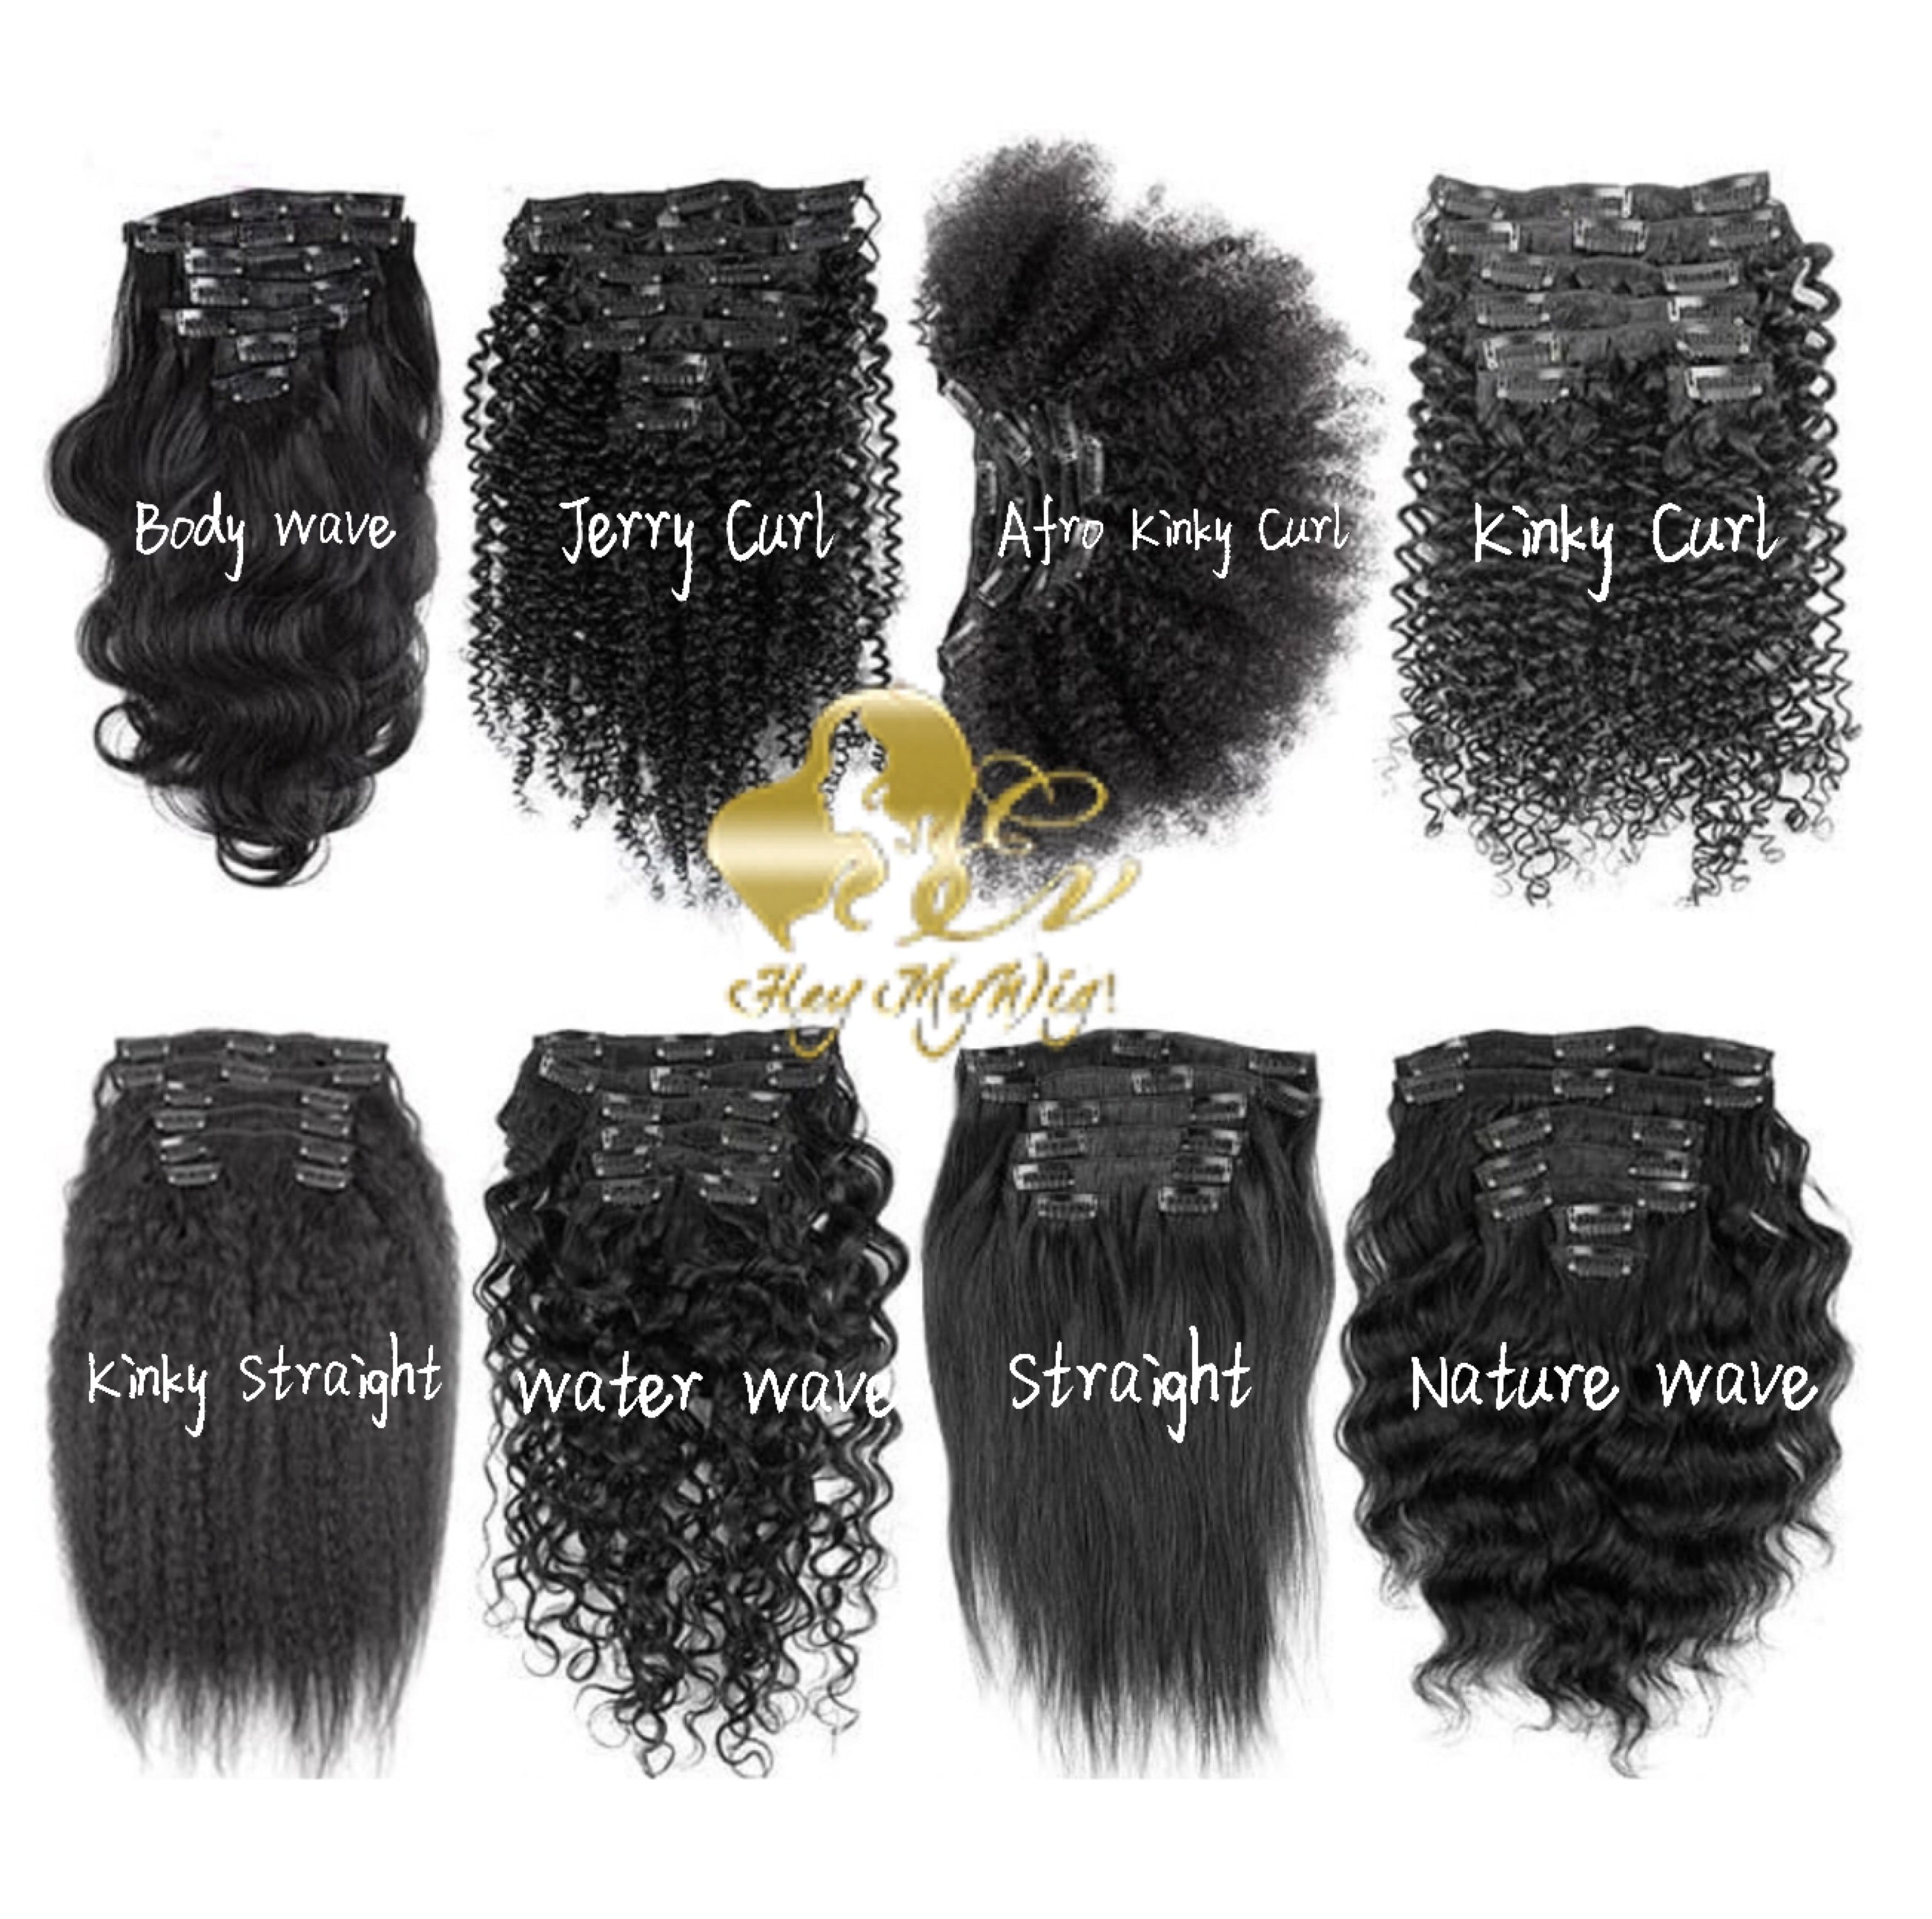 Clip in human hair extension 4A 4B Afro curly texture hair